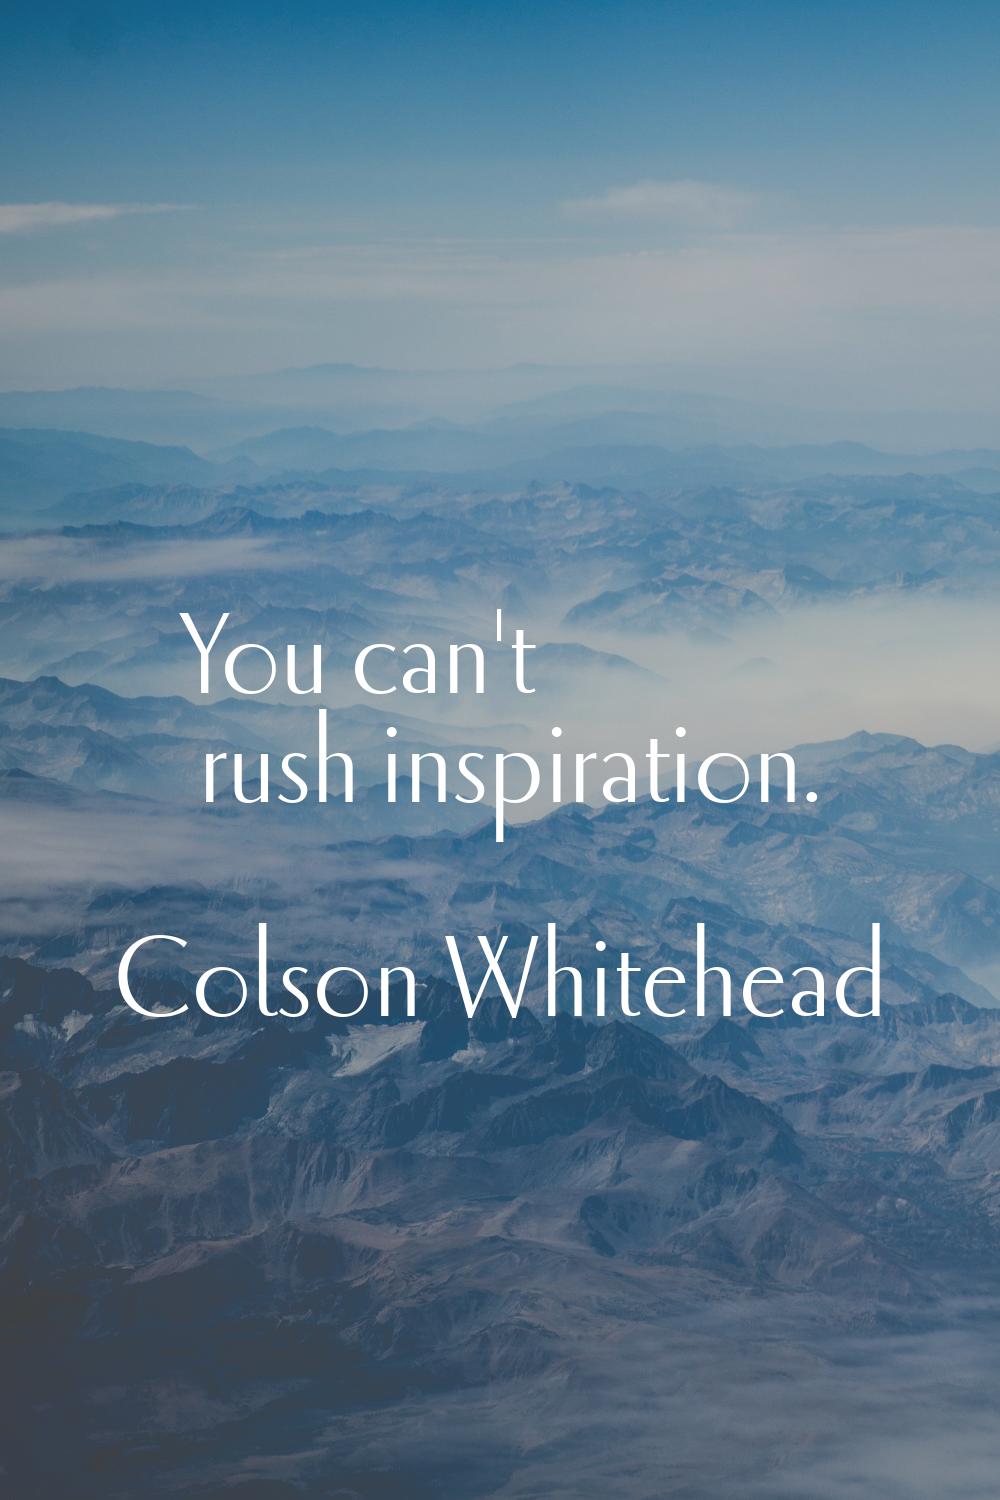 You can't rush inspiration.